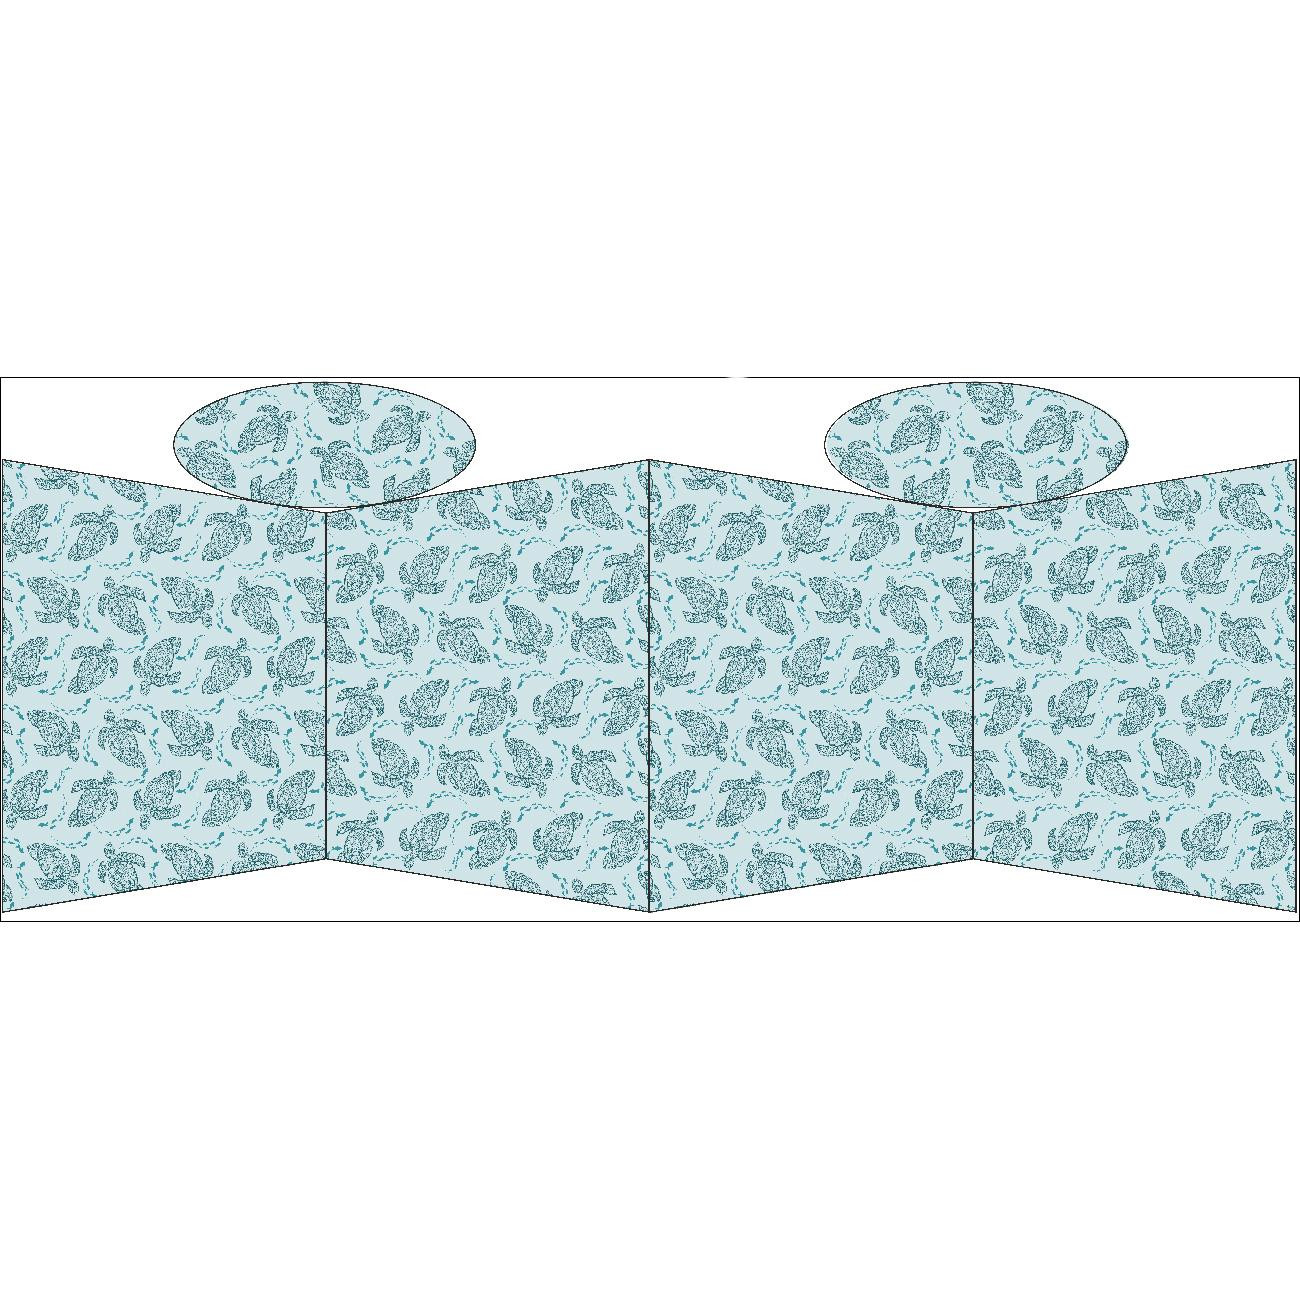 TOTE BAG - TURTLES AND SHOAL (BLUE PLANET) - sewing set